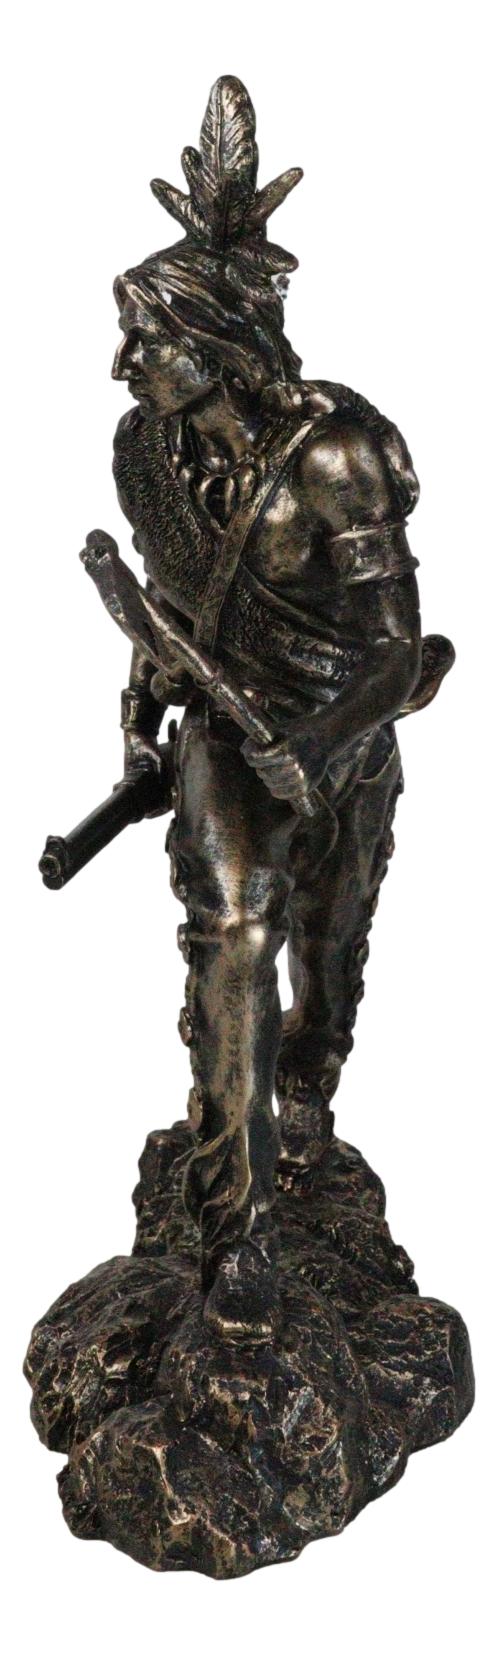 Native Sioux Indian Tribal Warrior Chief Holding Tomahawk Axe And Rifle Figurine